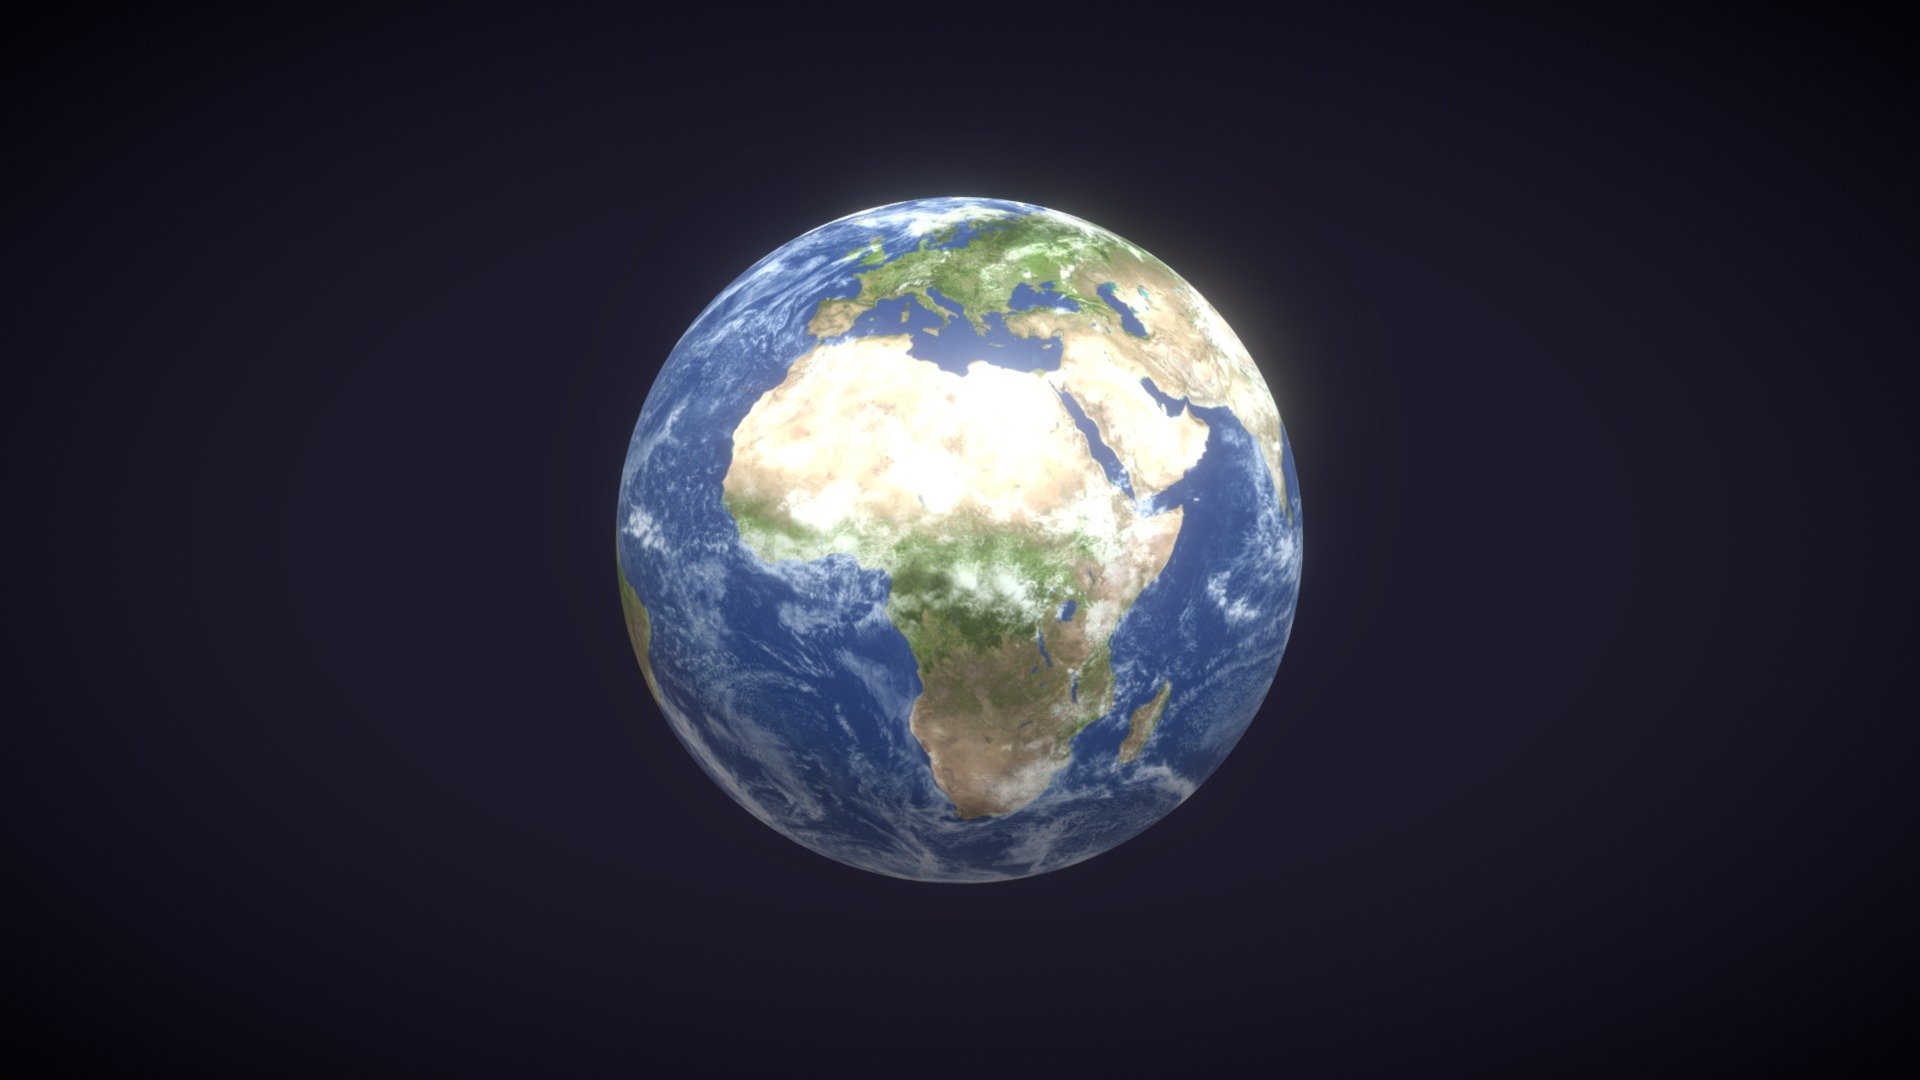 Photorealistic Earth 8k Textures 3D Model  is completely ready to be used in your projects&hellip;

All textures and materials are included and mapped in every format. The model is completely ready for use visualization in any 3d software/engine.

Technical details:




A transparency map is included for the glass material. White color is glass, black is nonglass.

File formats included  are: FBX, OBJ, GLB, ABC, DAE, PLY, STL, BLEND, x3d, gLTF (generated), USDZ (generated)

Native software file format: BLEND

Polygons: 24,576

Vertices: 24,578

Textures: Color, Metallic, Roughness, Normal, AO.

All textures are 8k (8192x4096) resolution.

Notes:
- The ground (surface) and clouds (atmosphere) are fused in the same texture.
- The model uses only color and normal textures and there is also the texture for the background stars in the pack.
- There is also a beauty light to simulate some glow at the edge of the planet (this will be available only in the .blend file) 3d model